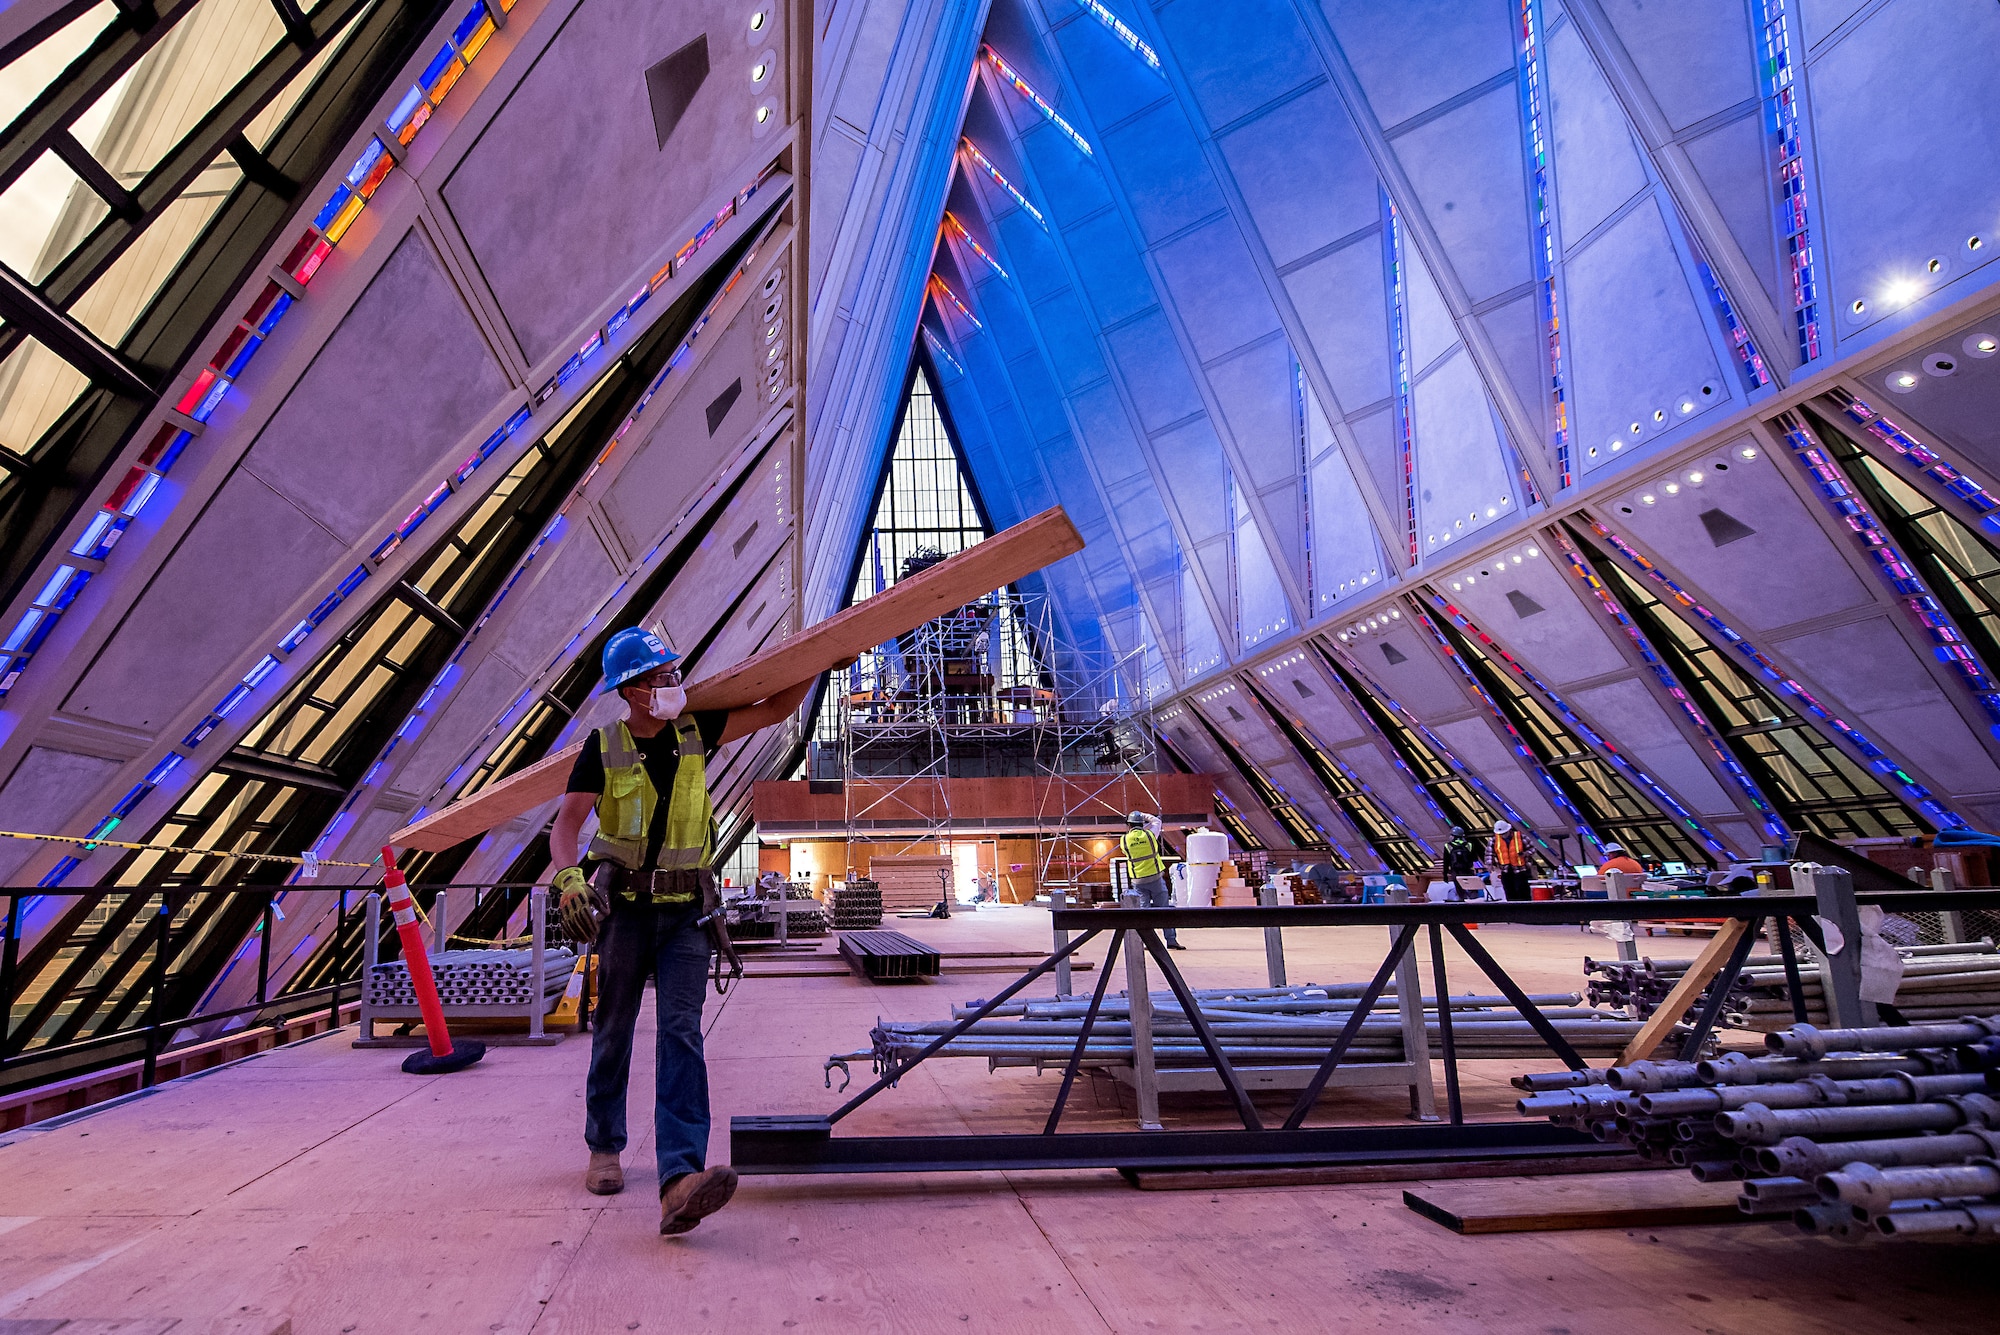 Crews erect scaffolding around the interior of the U.S. Air Force Academy Cadet Chapel on May 11, 2020 in Colorado Springs, Colorado.